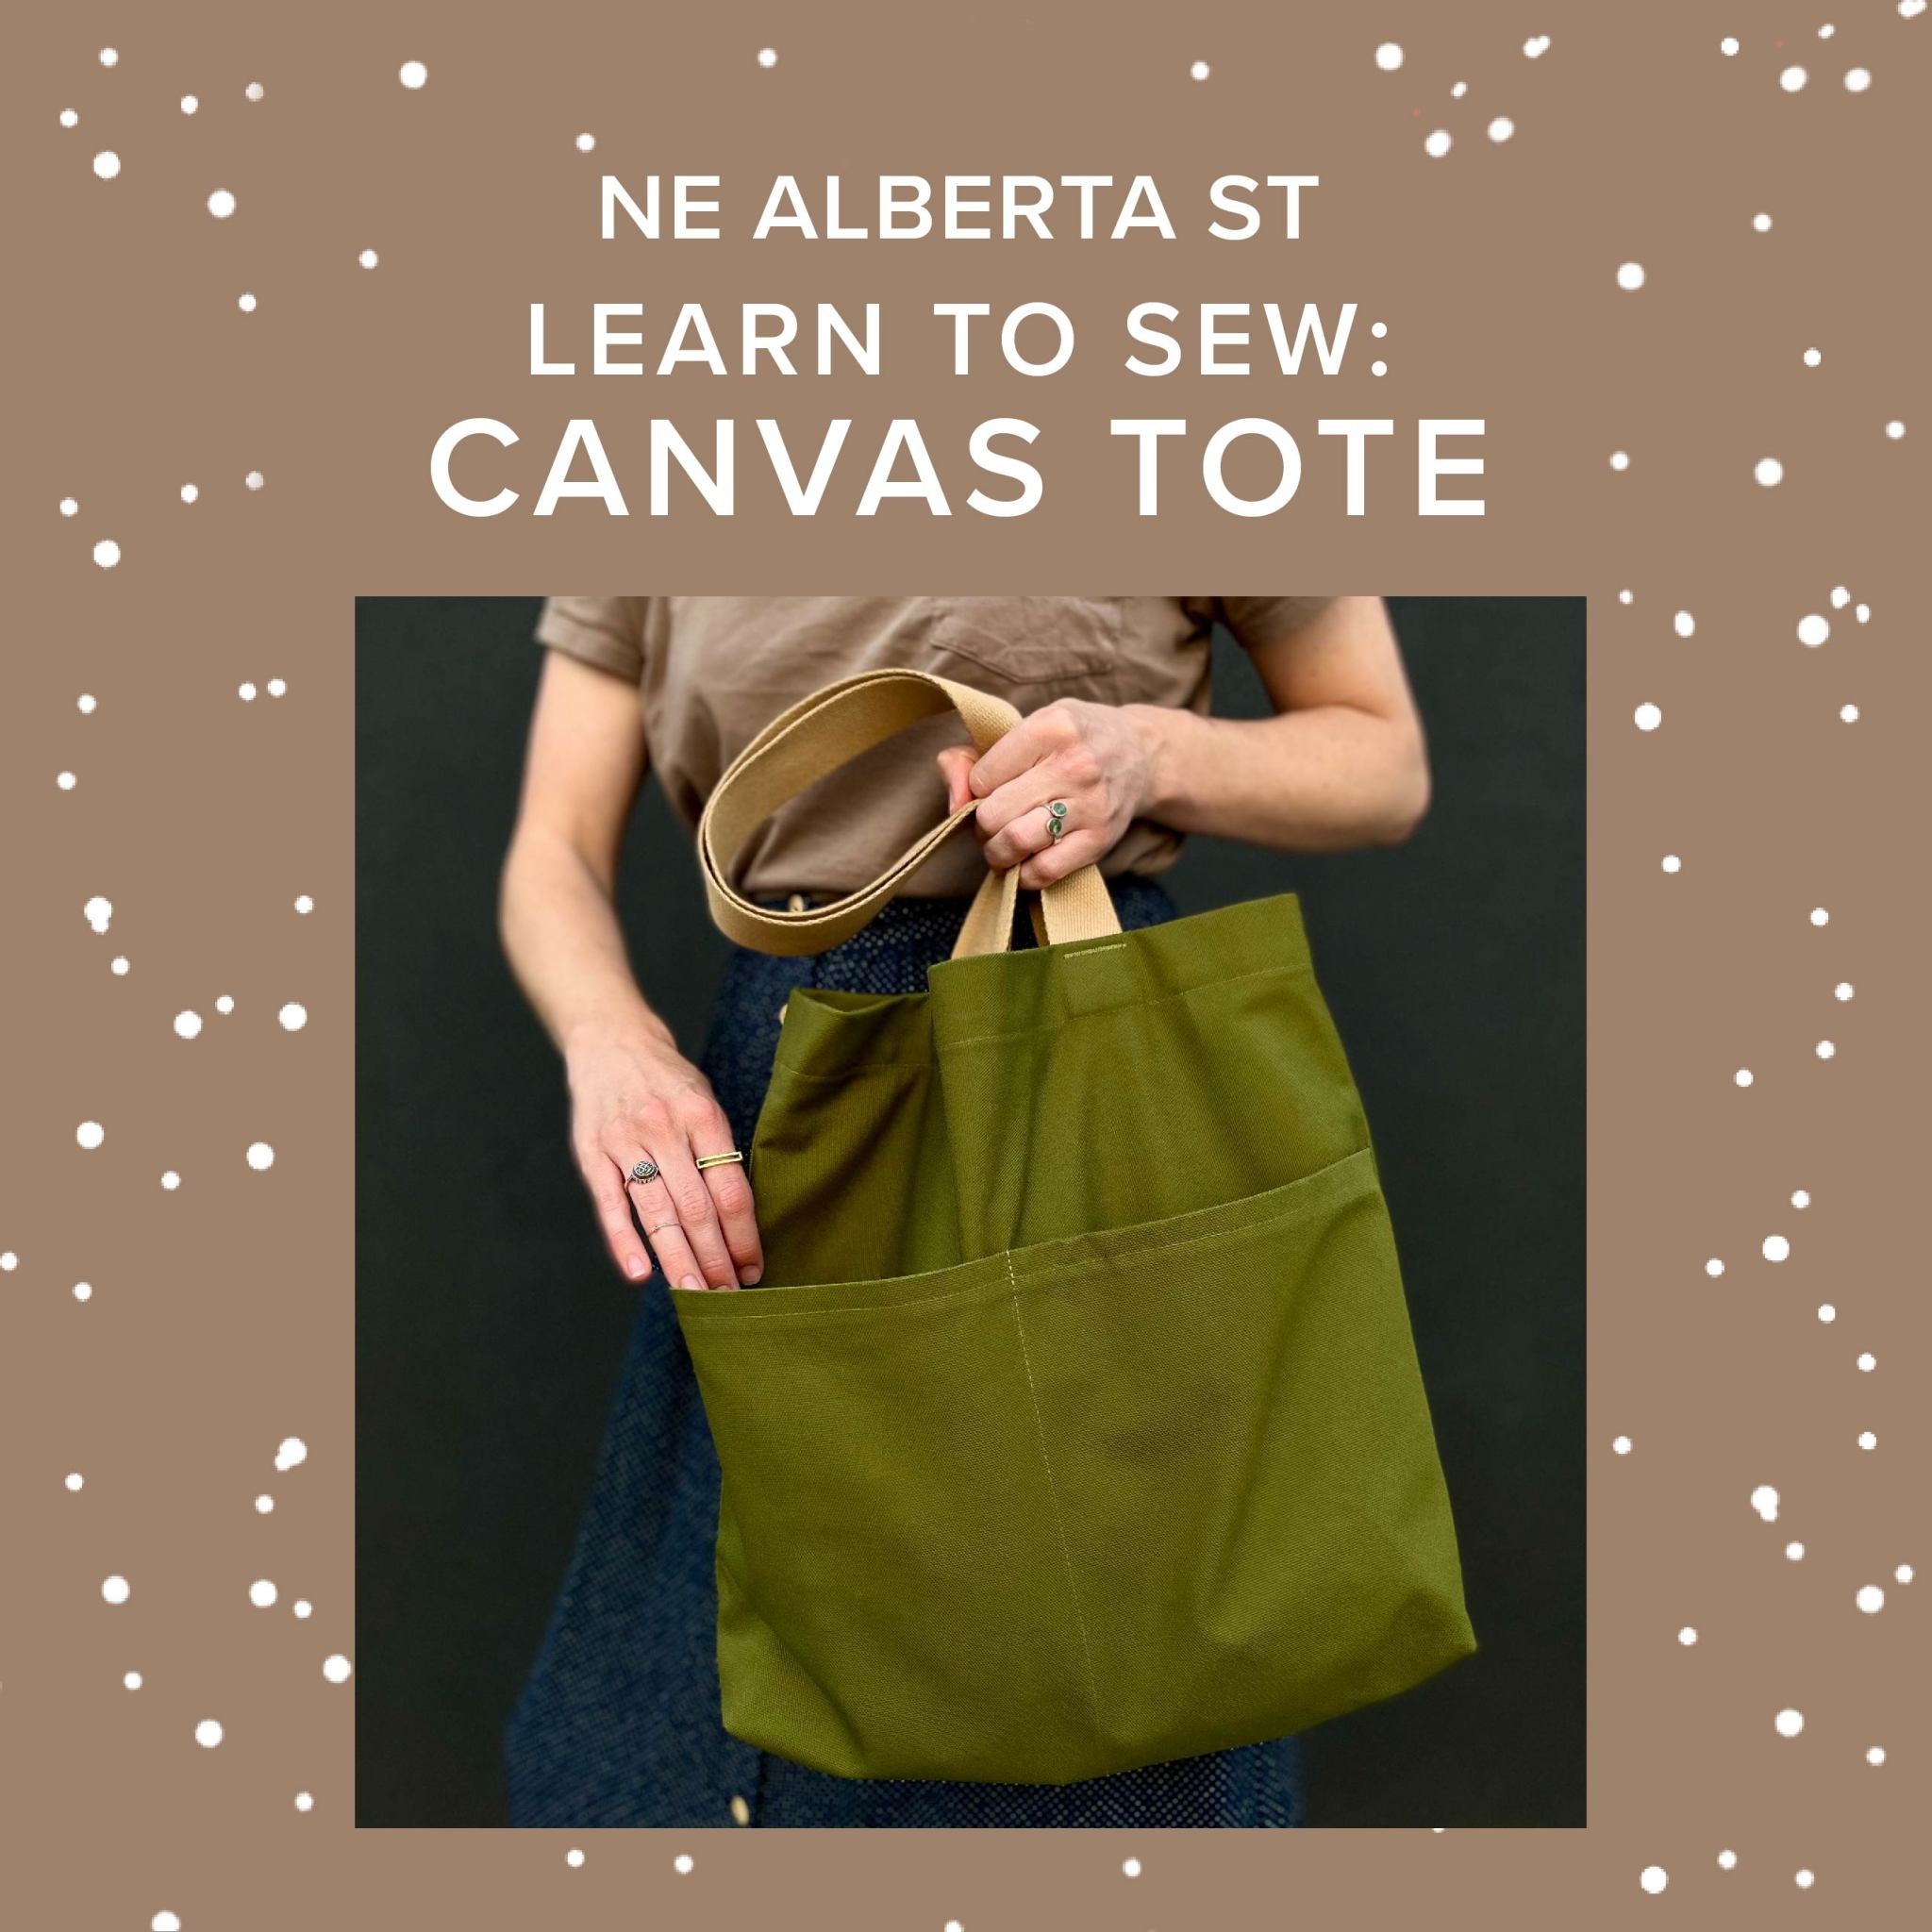 Rachel Halse Learn to Sew: Canvas Tote, Sunday, June 23rd, 2pm-5pm